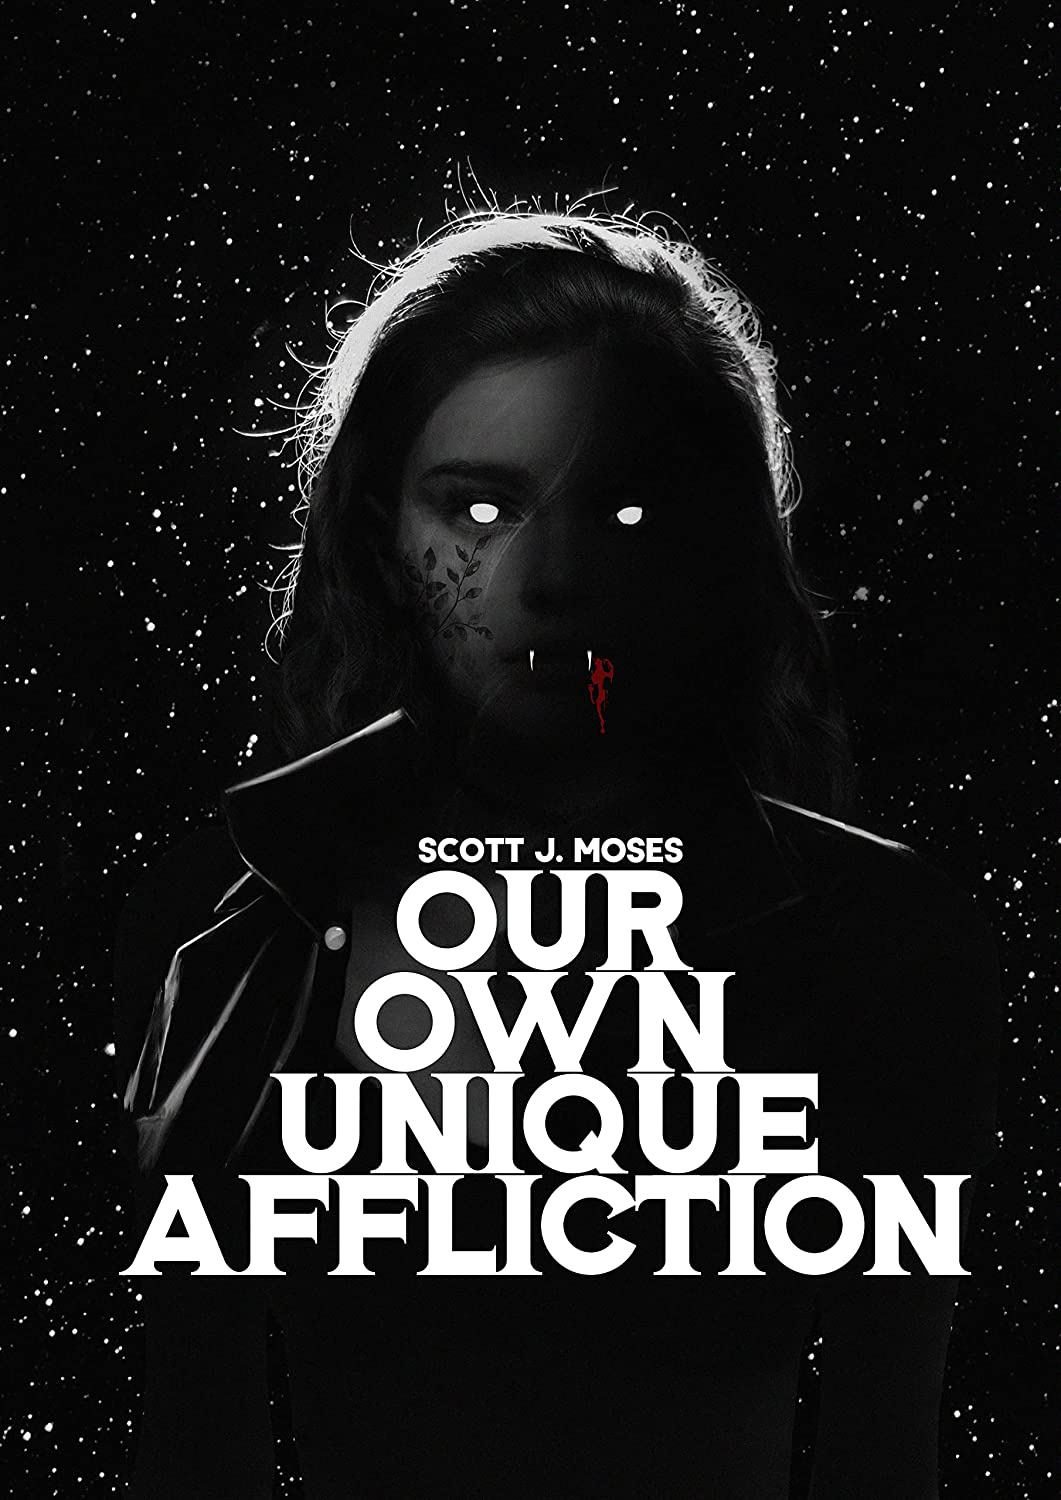 
					Cover art from "Our Own Unique Affliction" by Scott J. Moses